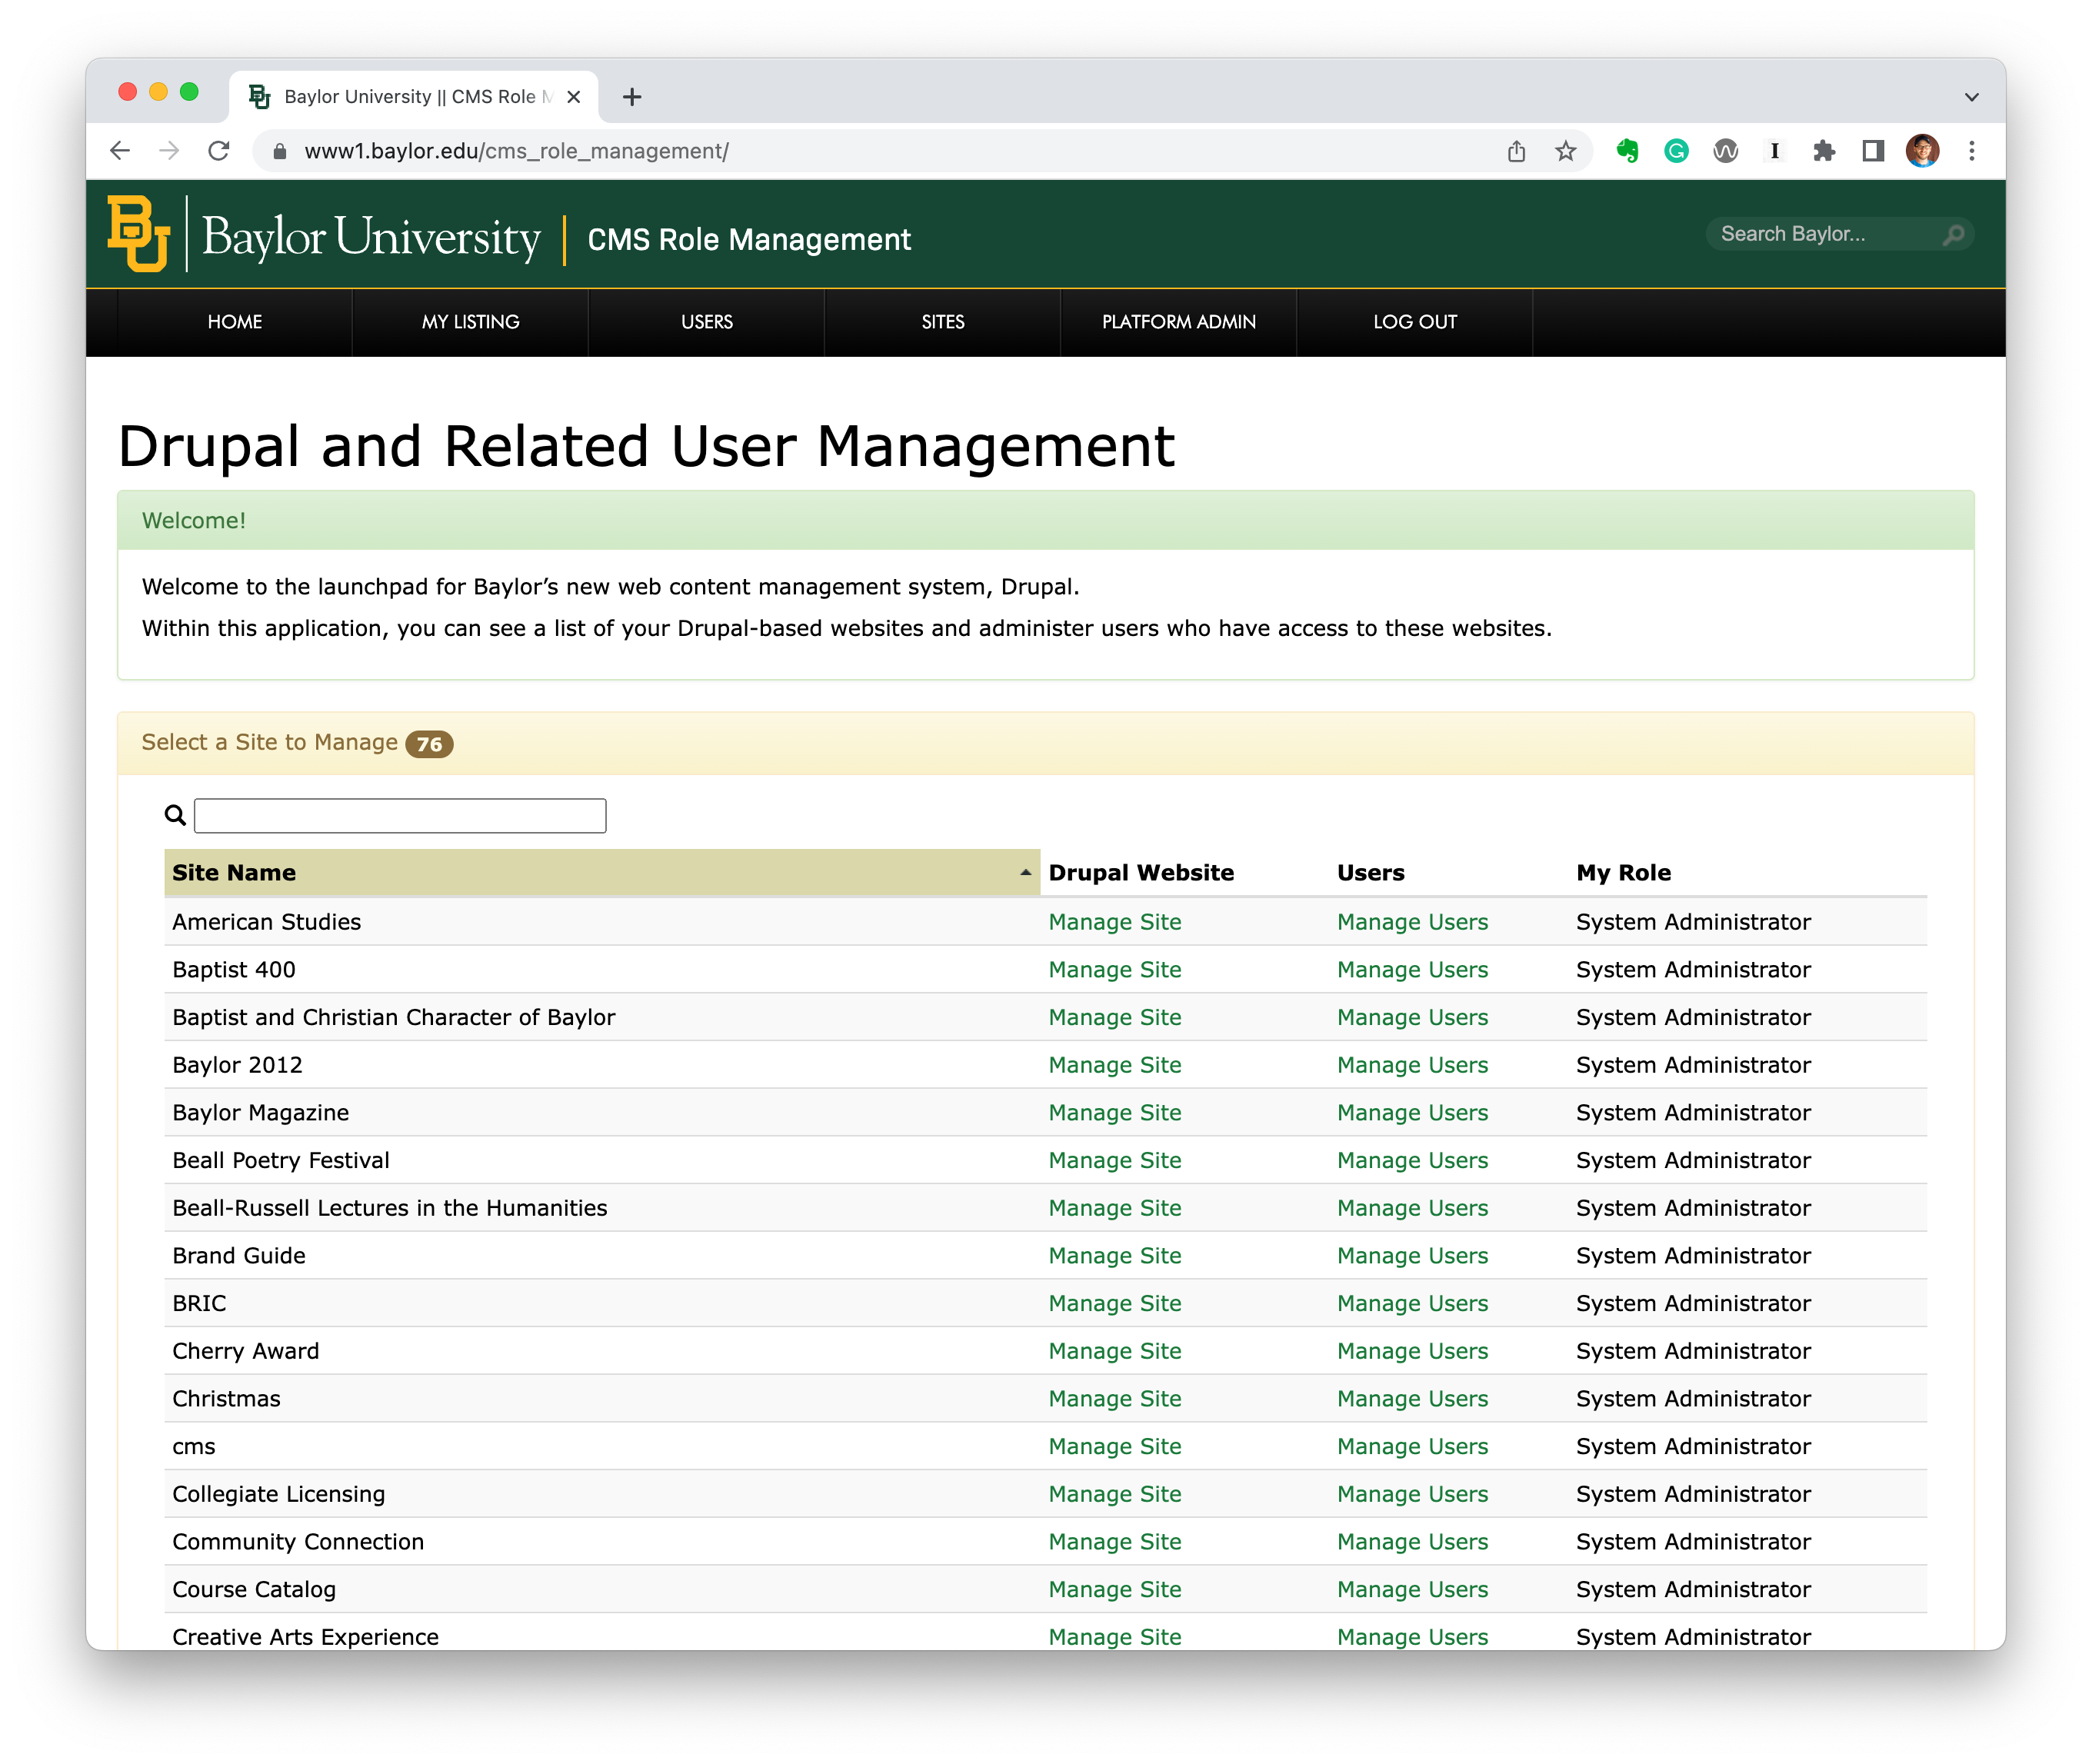 Drupal and Related User Management